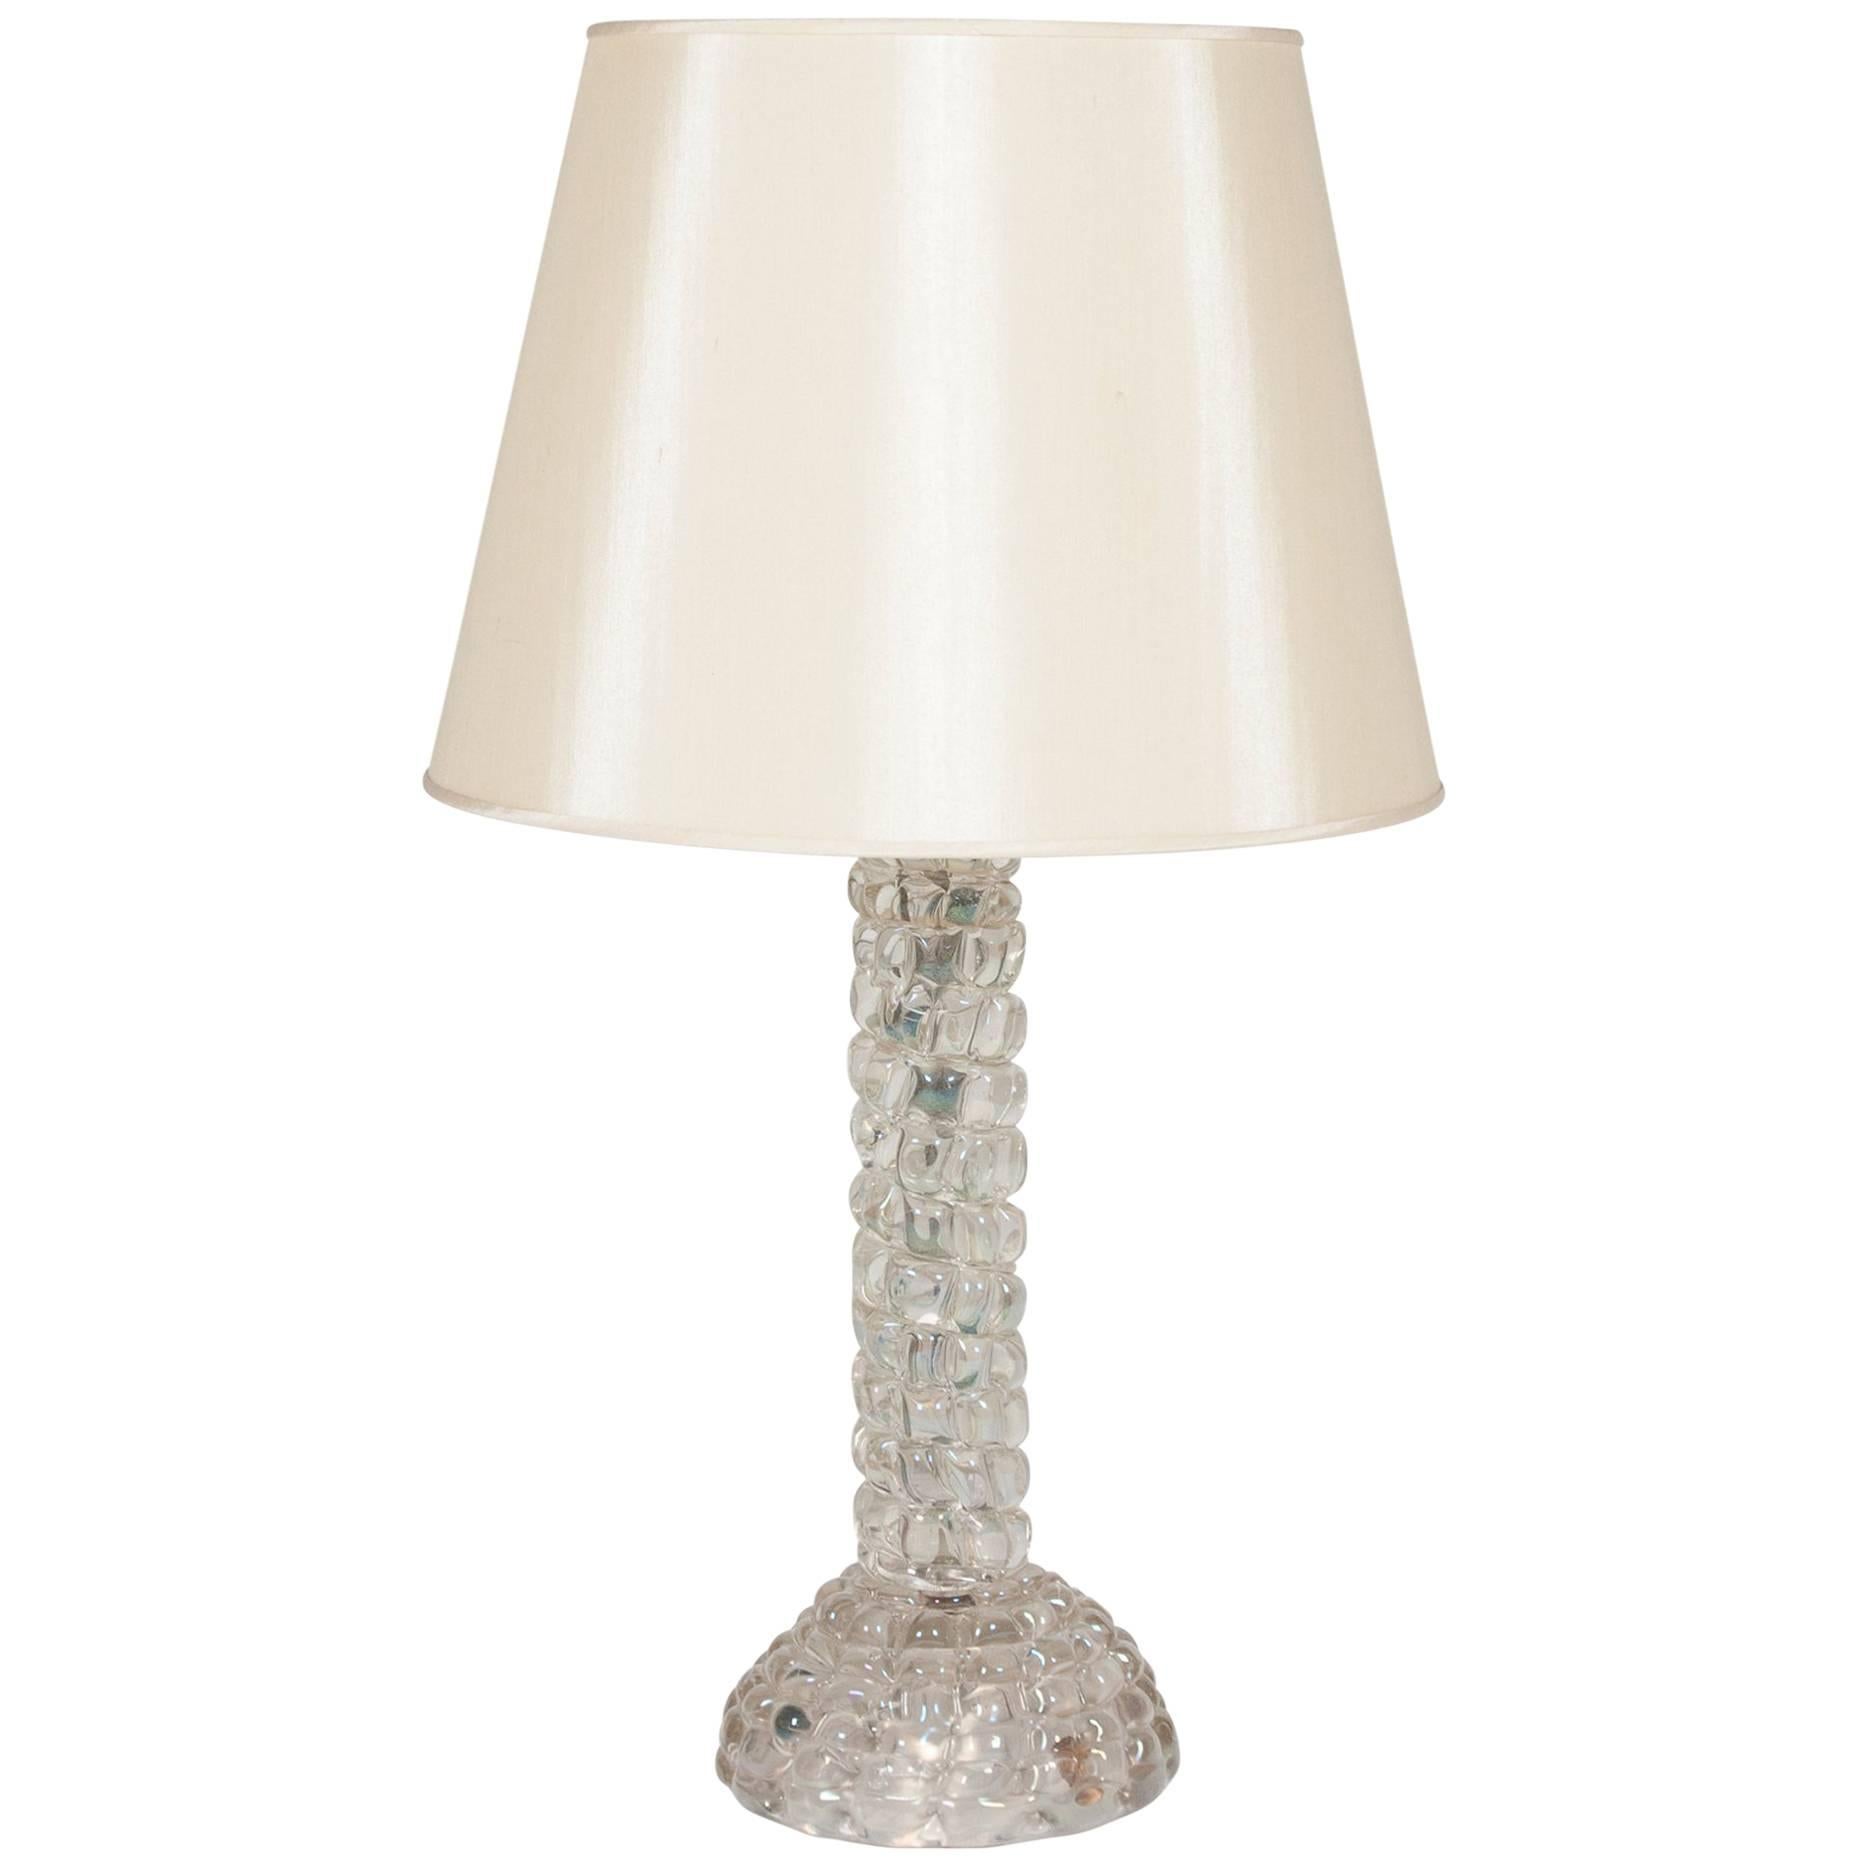 Barovier e Toso Glass Table Lamp, Italian, 1940s For Sale